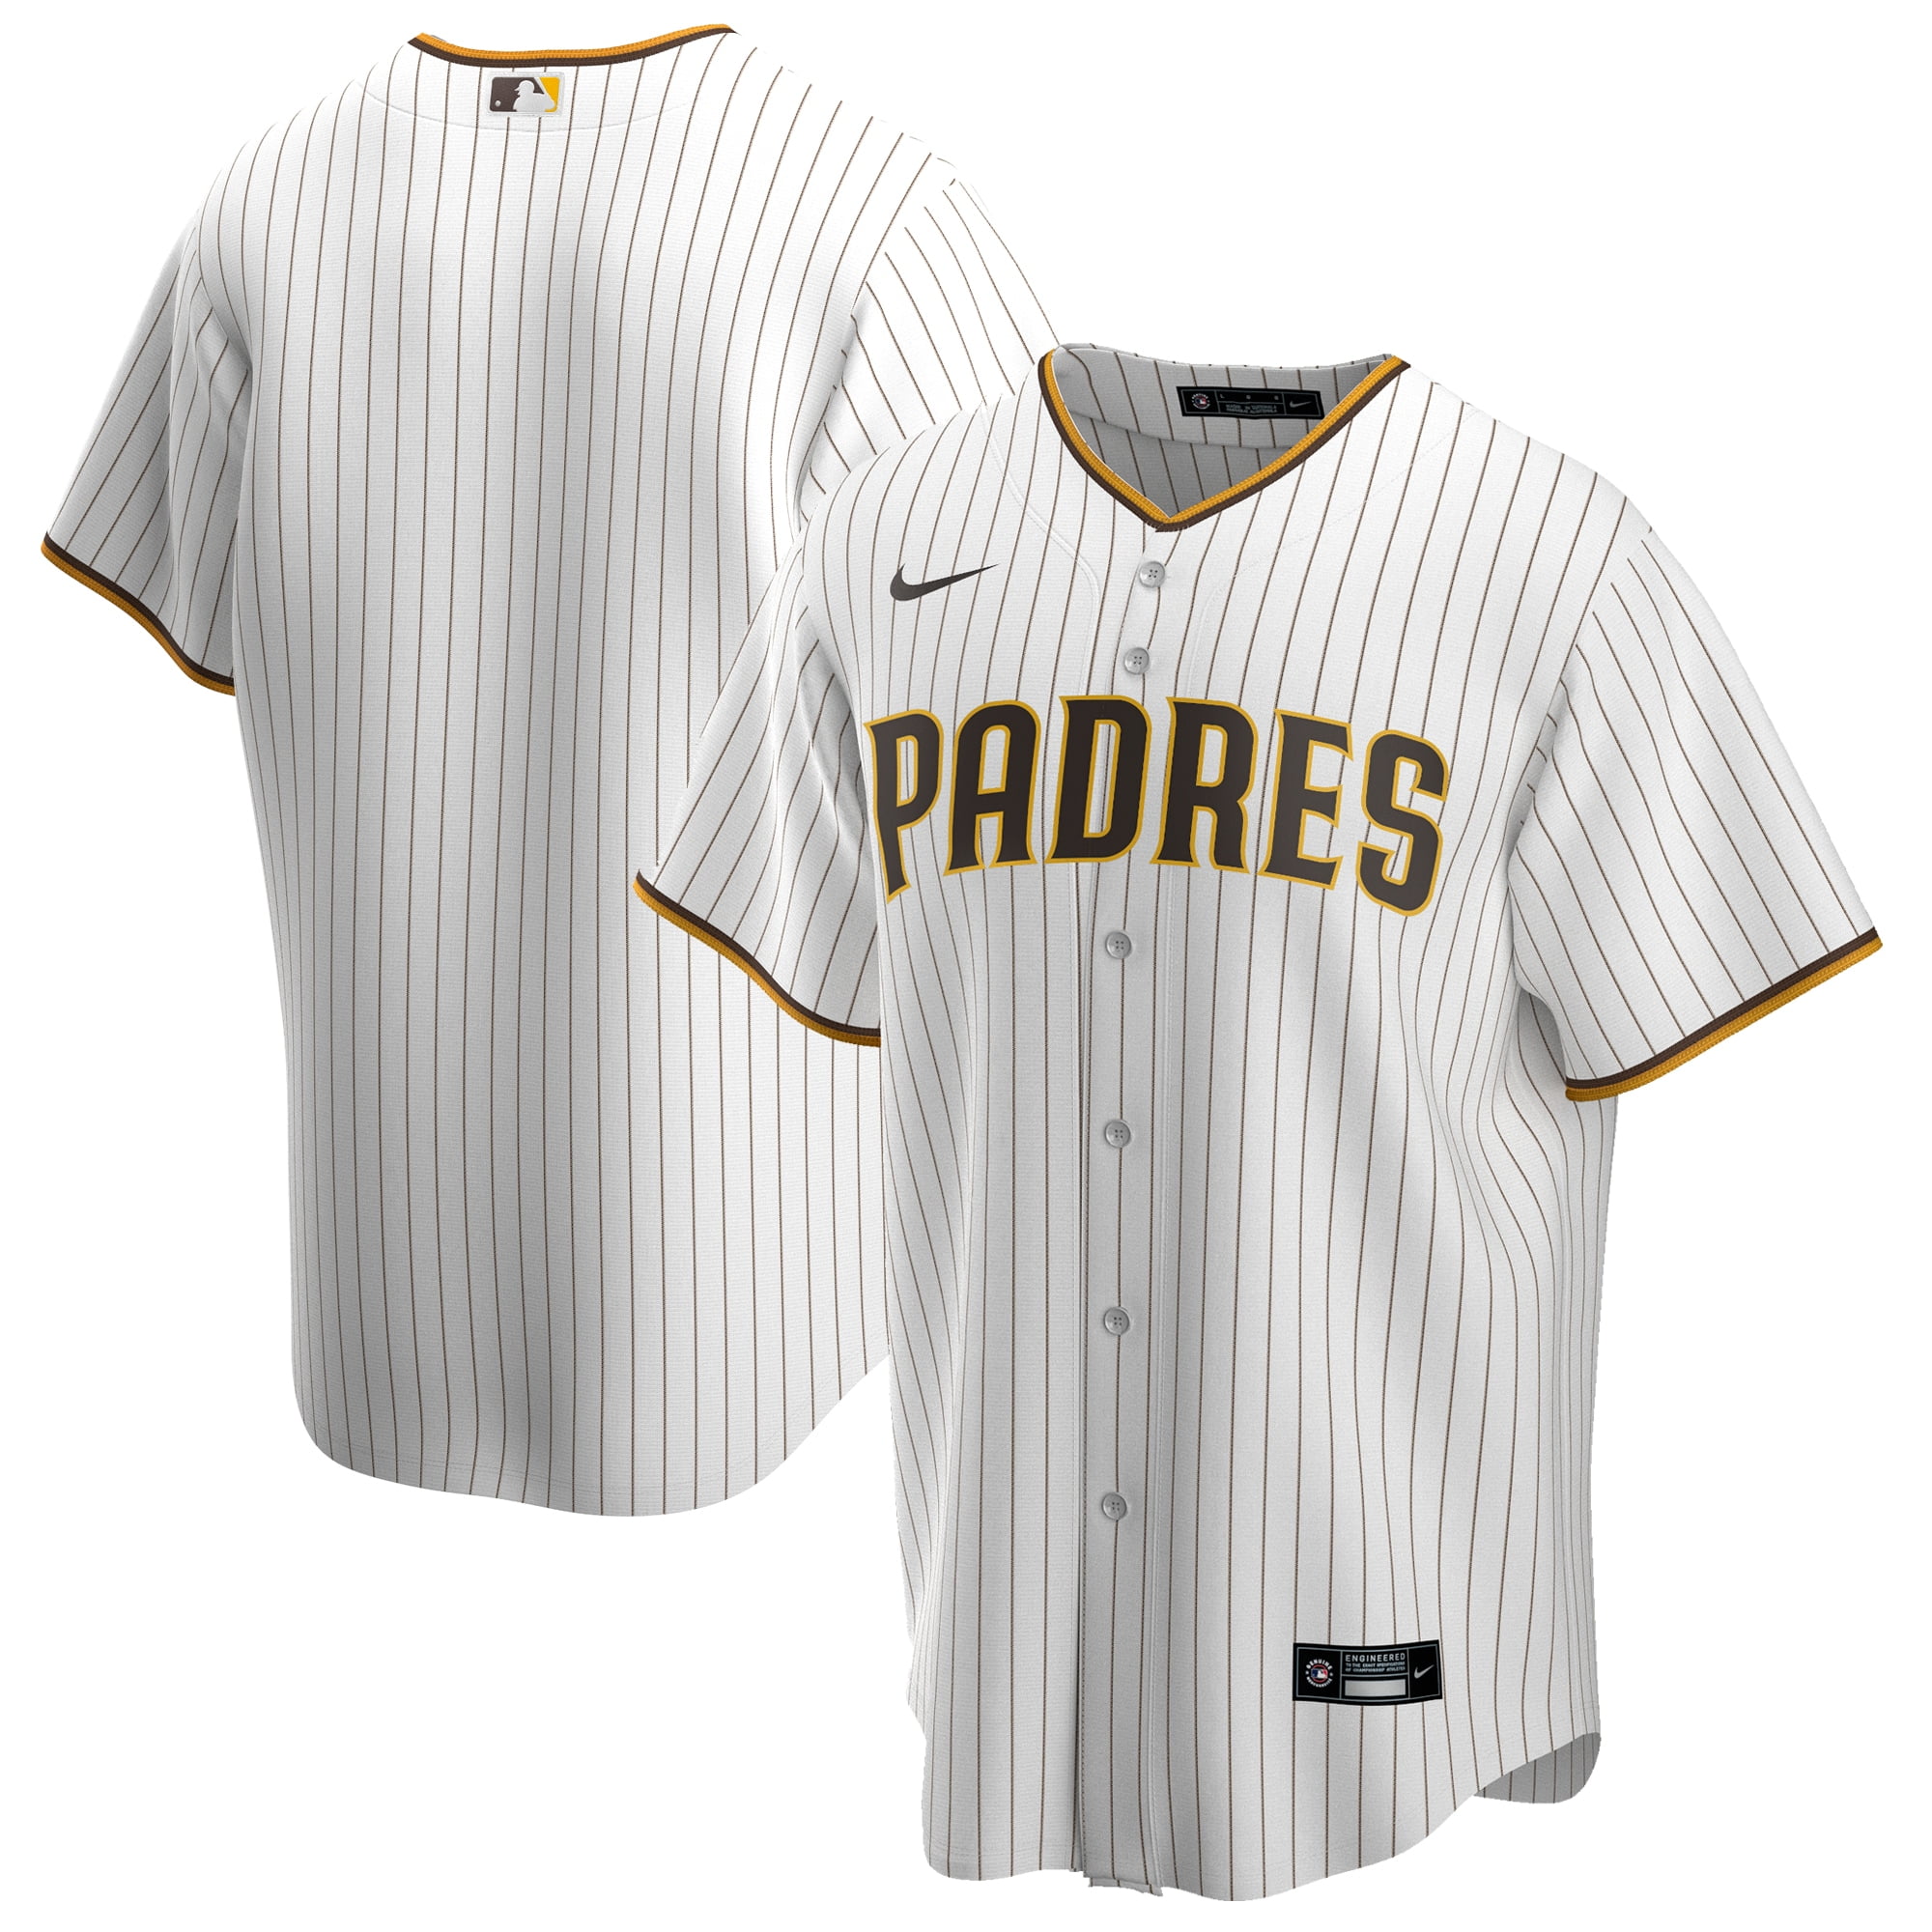 sportswear for fans mens sportswear stretch and breathable fabric Padres 13#23 embroidered baseball uniform 